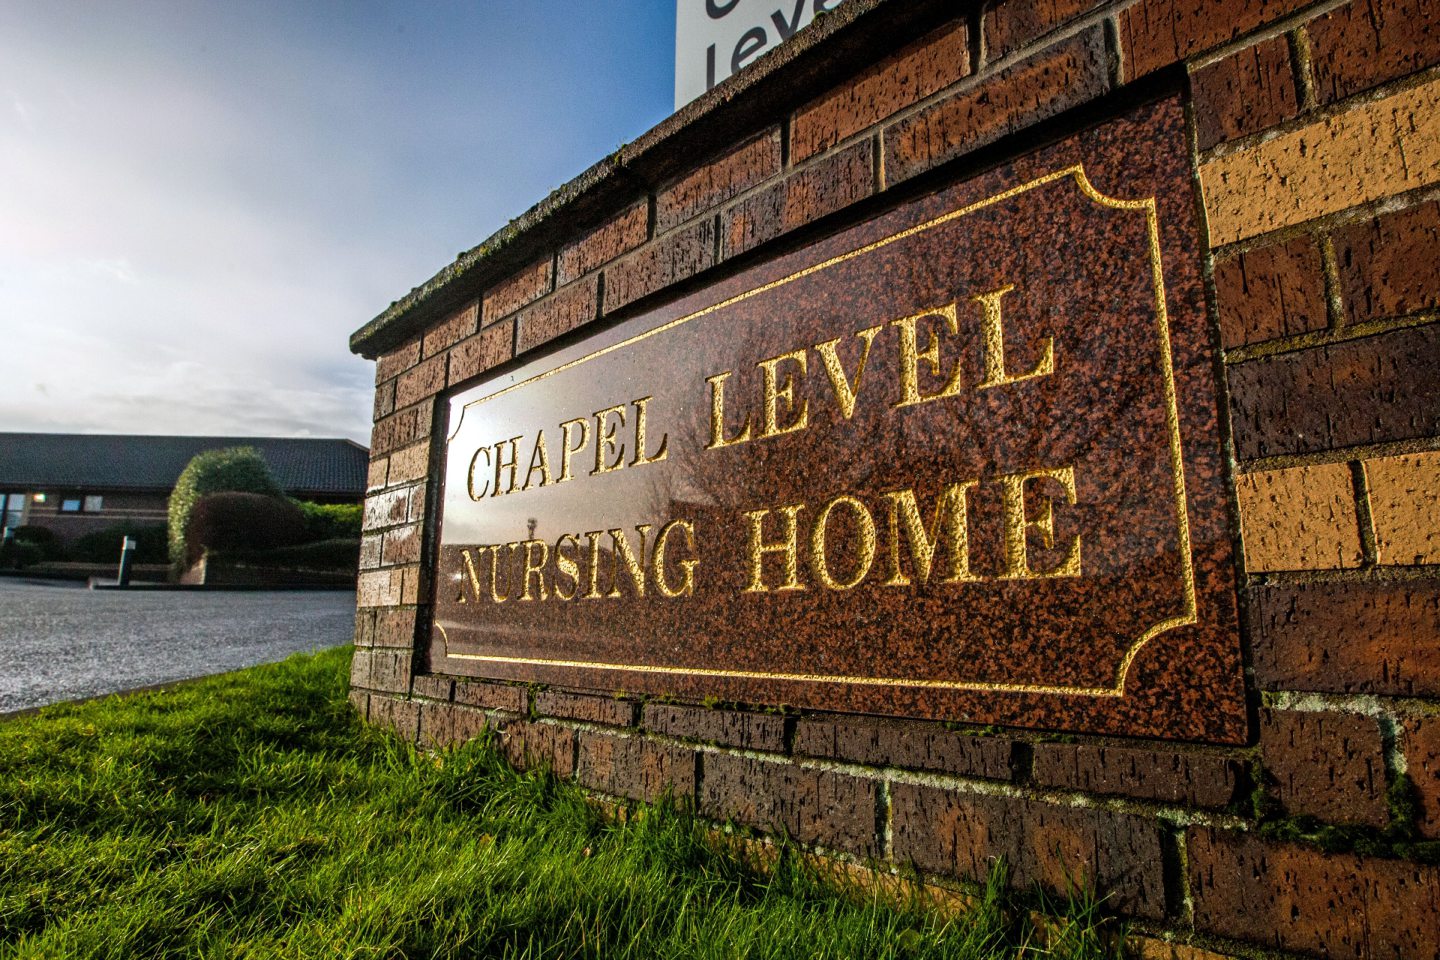 A sign for Chapel Level nursing home